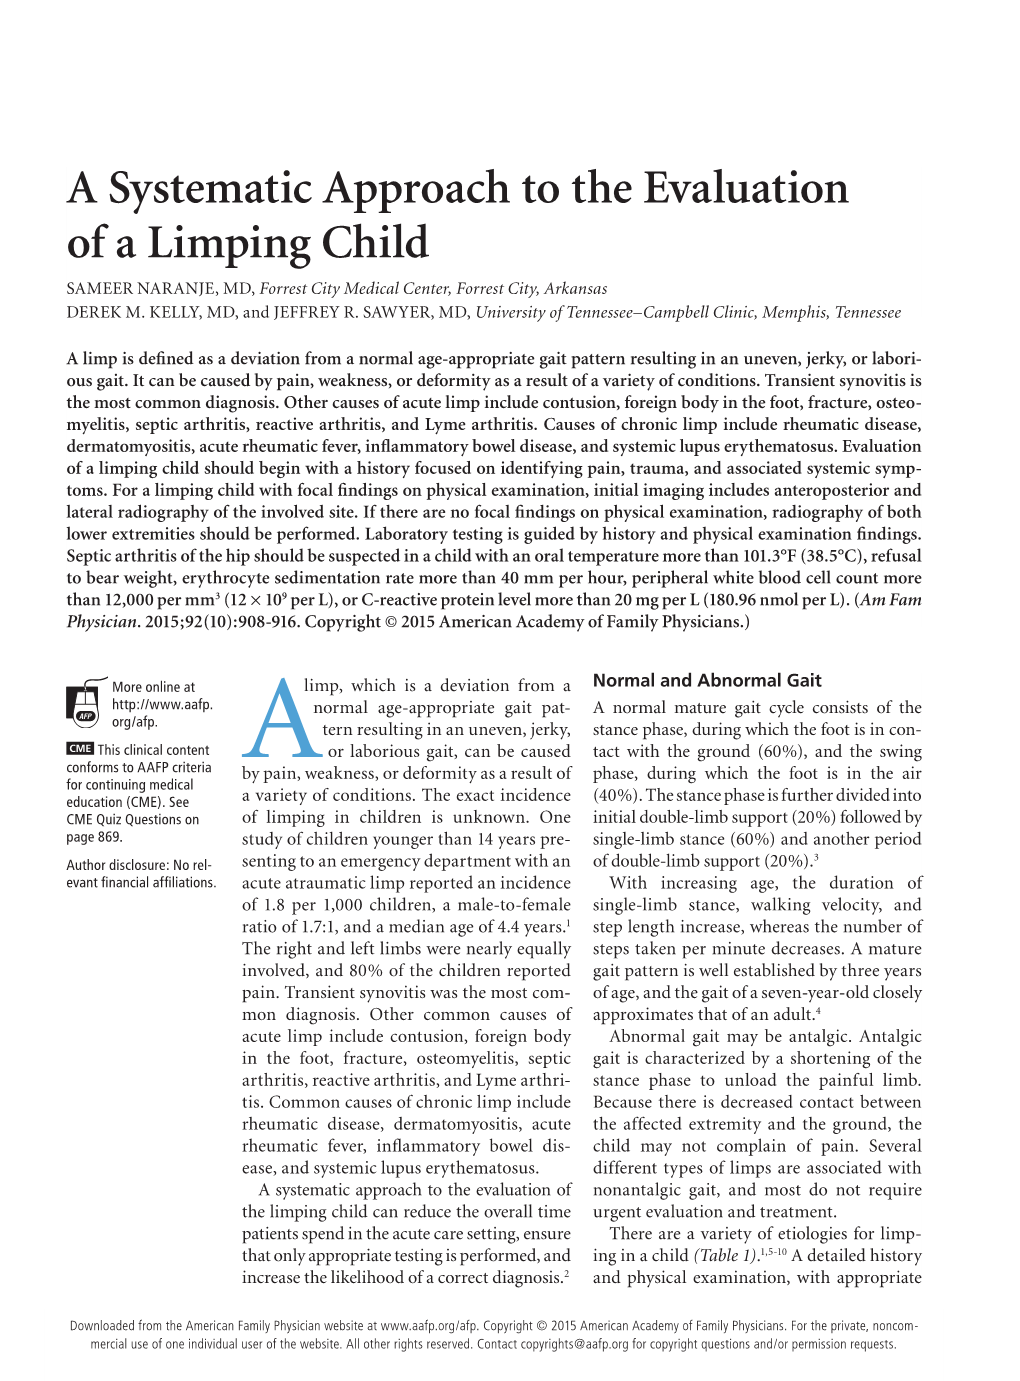 A Systematic Approach to the Evaluation of a Limping Child SAMEER NARANJE, MD, Forrest City Medical Center, Forrest City, Arkansas DEREK M